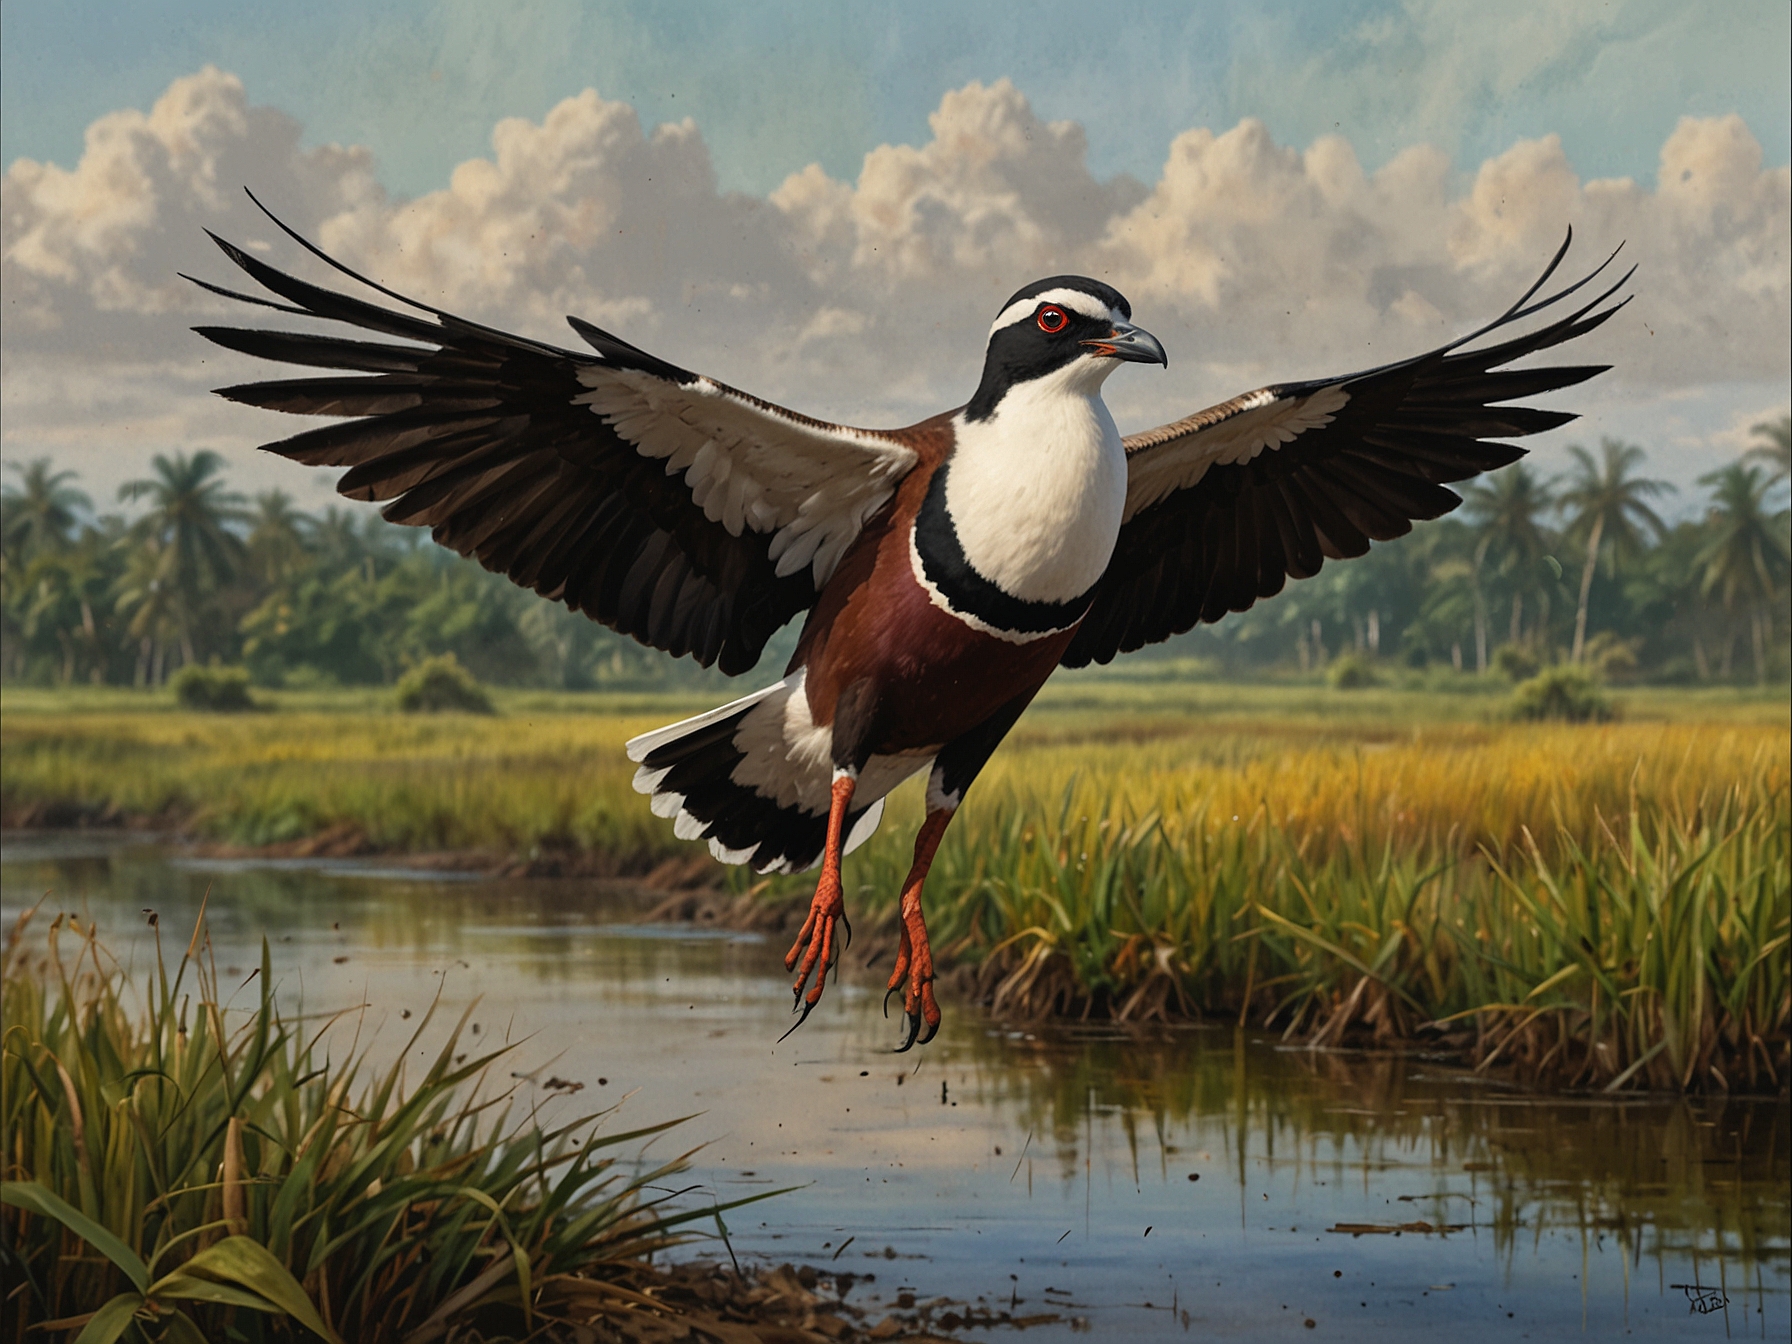 A colorful Javan Lapwing, one of the 'lost' bird species, flying over a marshland in Indonesia. Birdwatchers are encouraged to report sightings of such species to aid in their conservation.